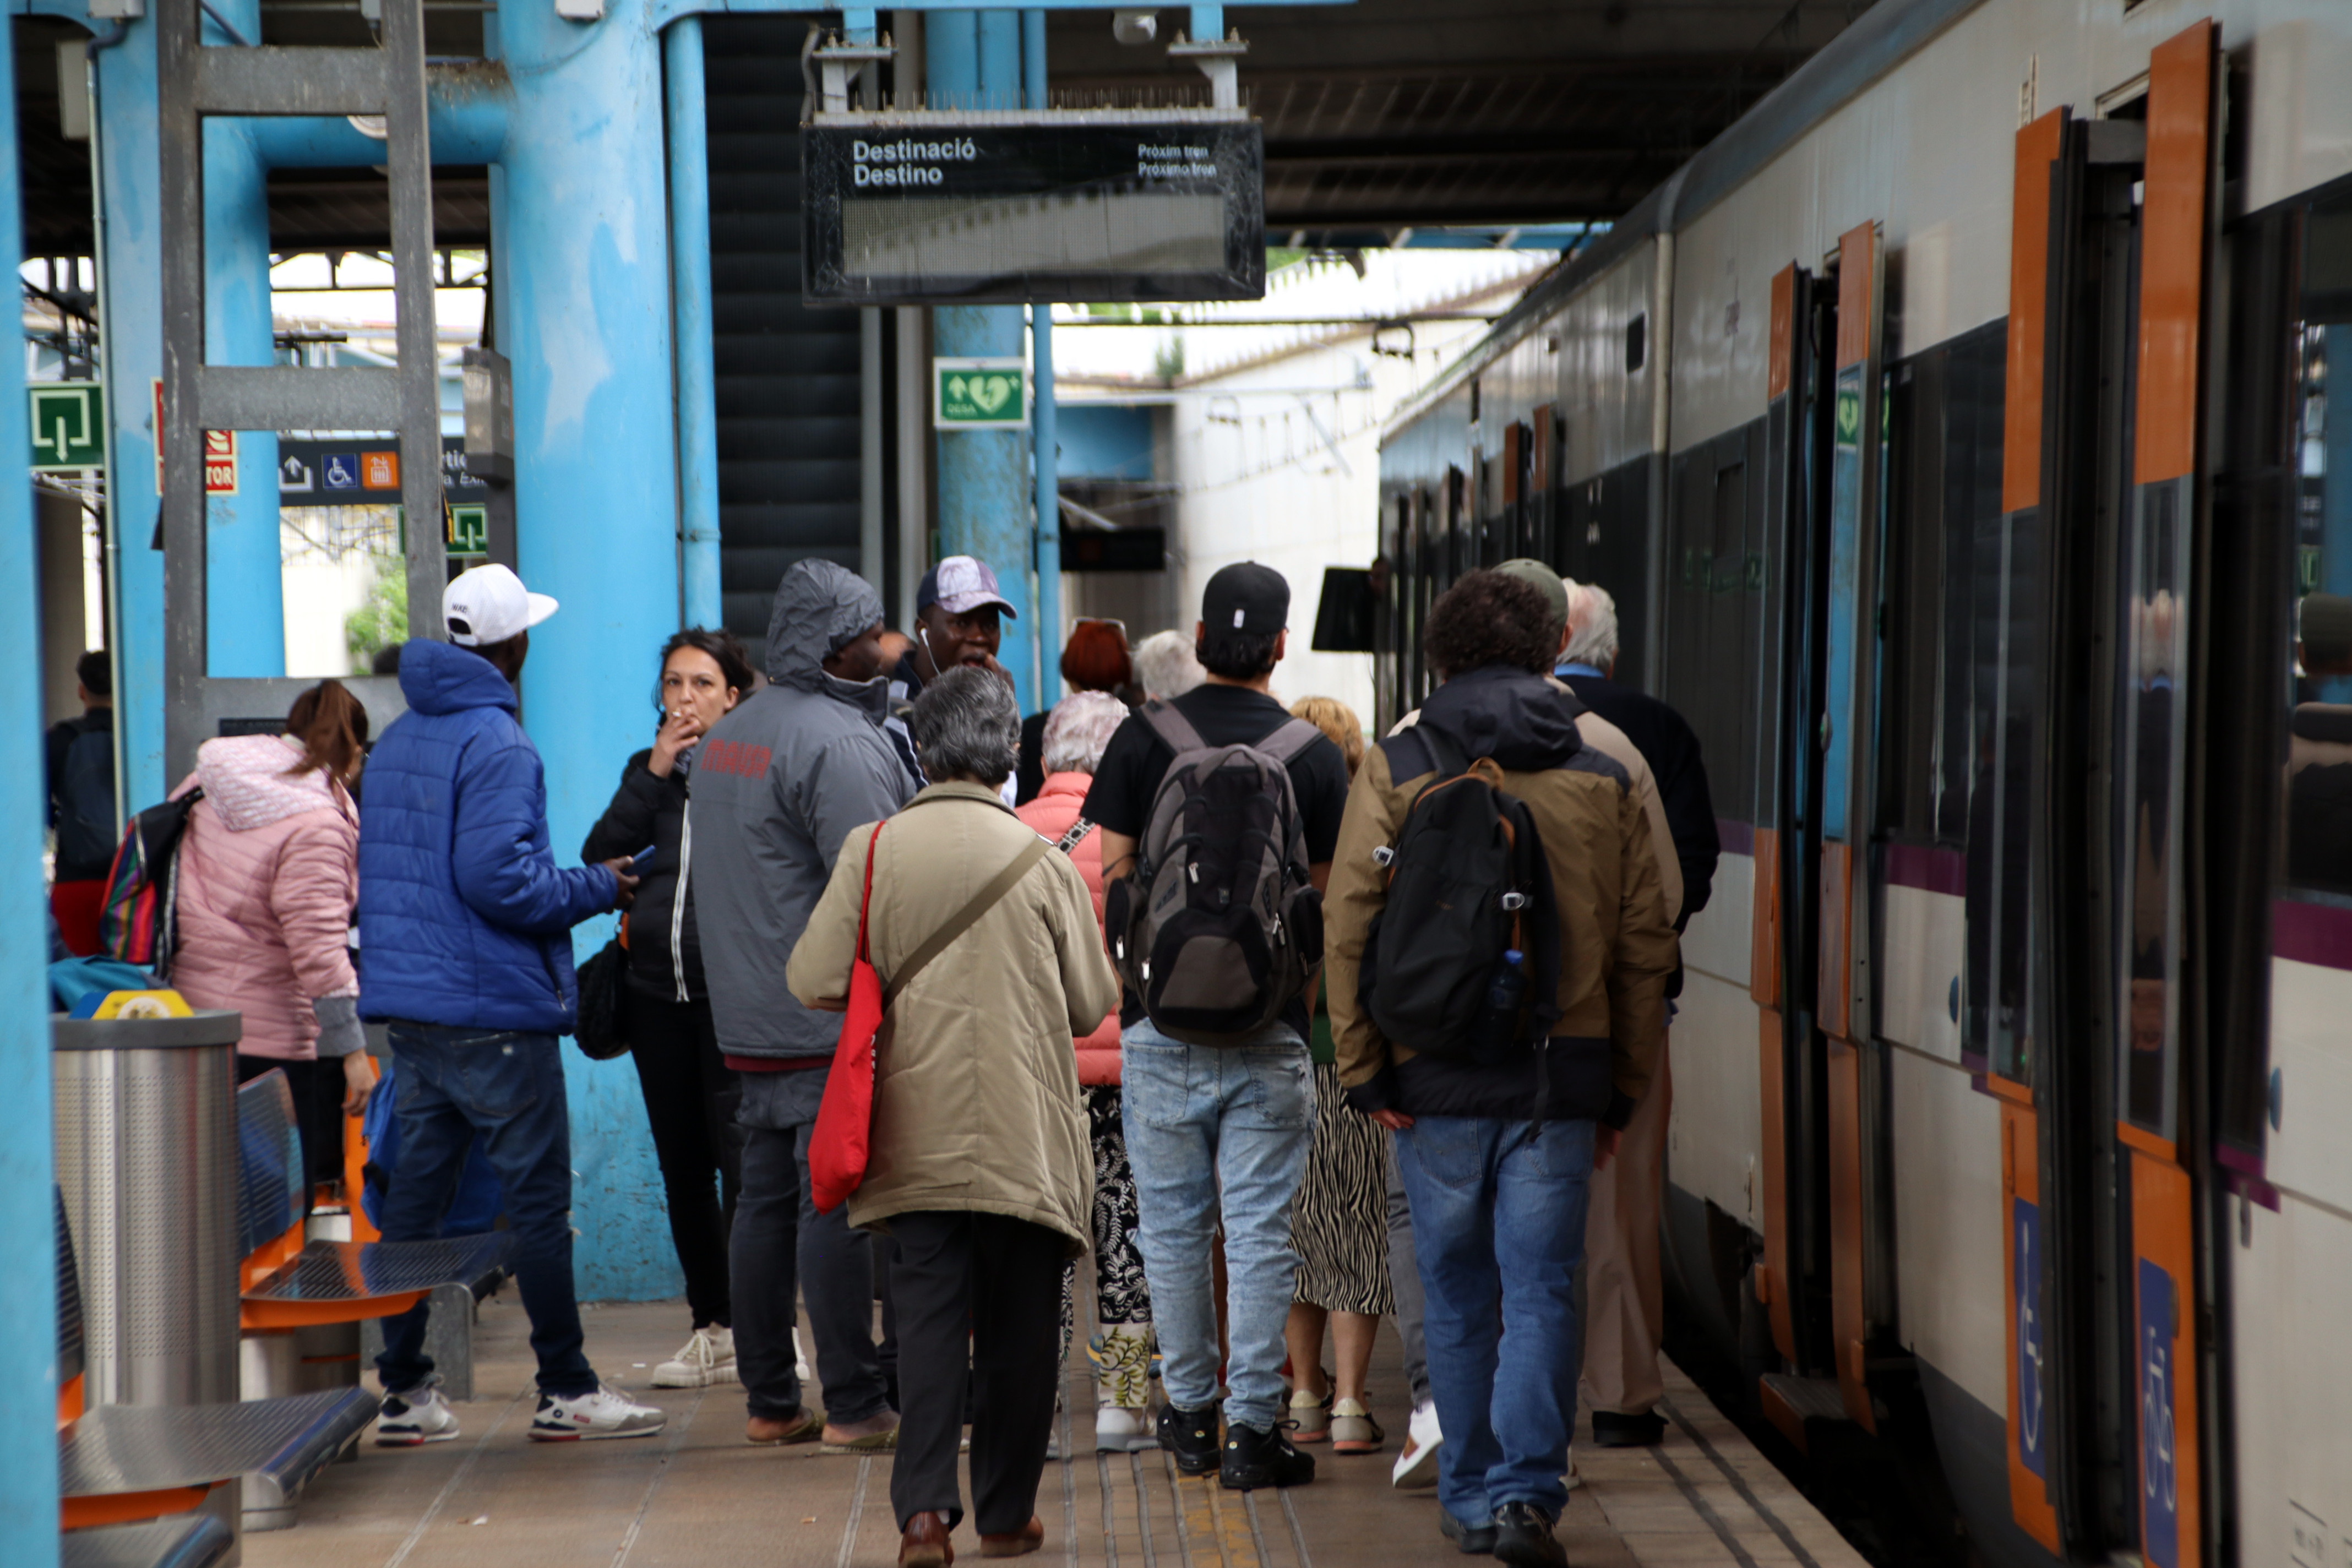 The copper theft on May 12 on the morning of the Catalan election caused significant disruptions to the commuter service.